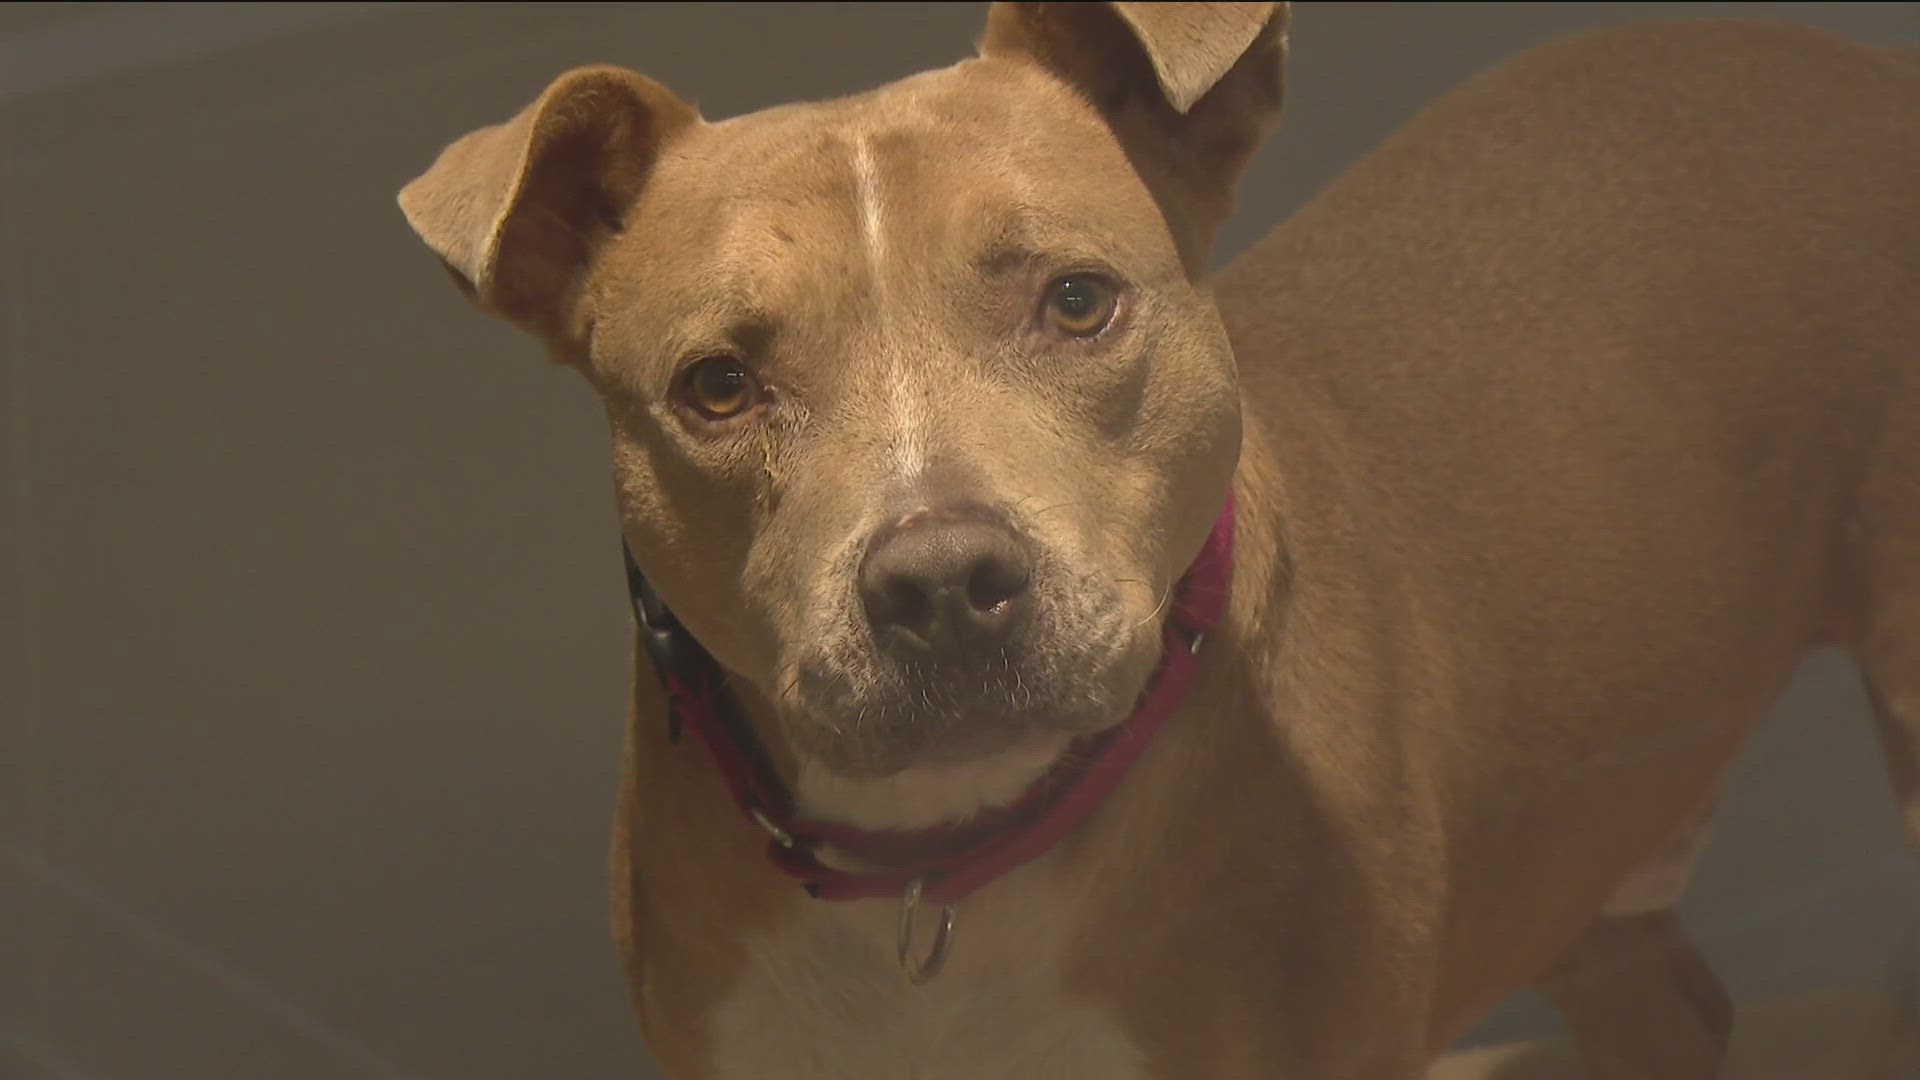 The CEO of the San Diego Humane Society said while they're not at the point of euthanasia, it has been discussed and may need to be considered.